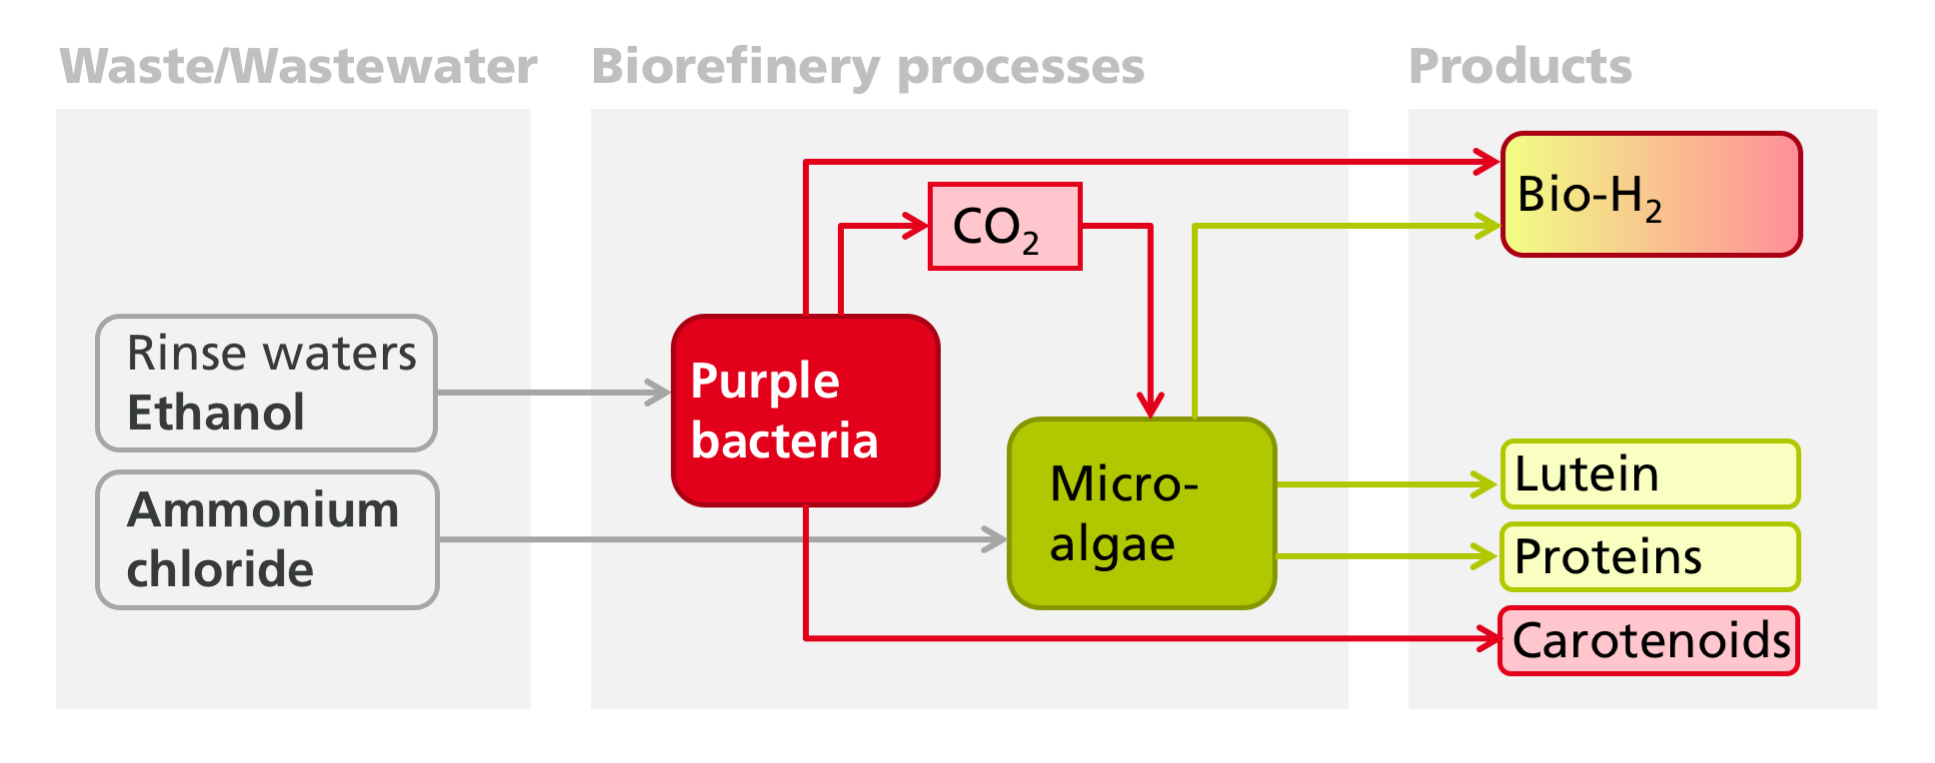 In the SmartBioH2-BW project, two interlinked biotechnological processes (purple bacteria and algae) will be used to produce biohydrogen and other products such as carotenoids from industrial wastewater and residual material streams. 